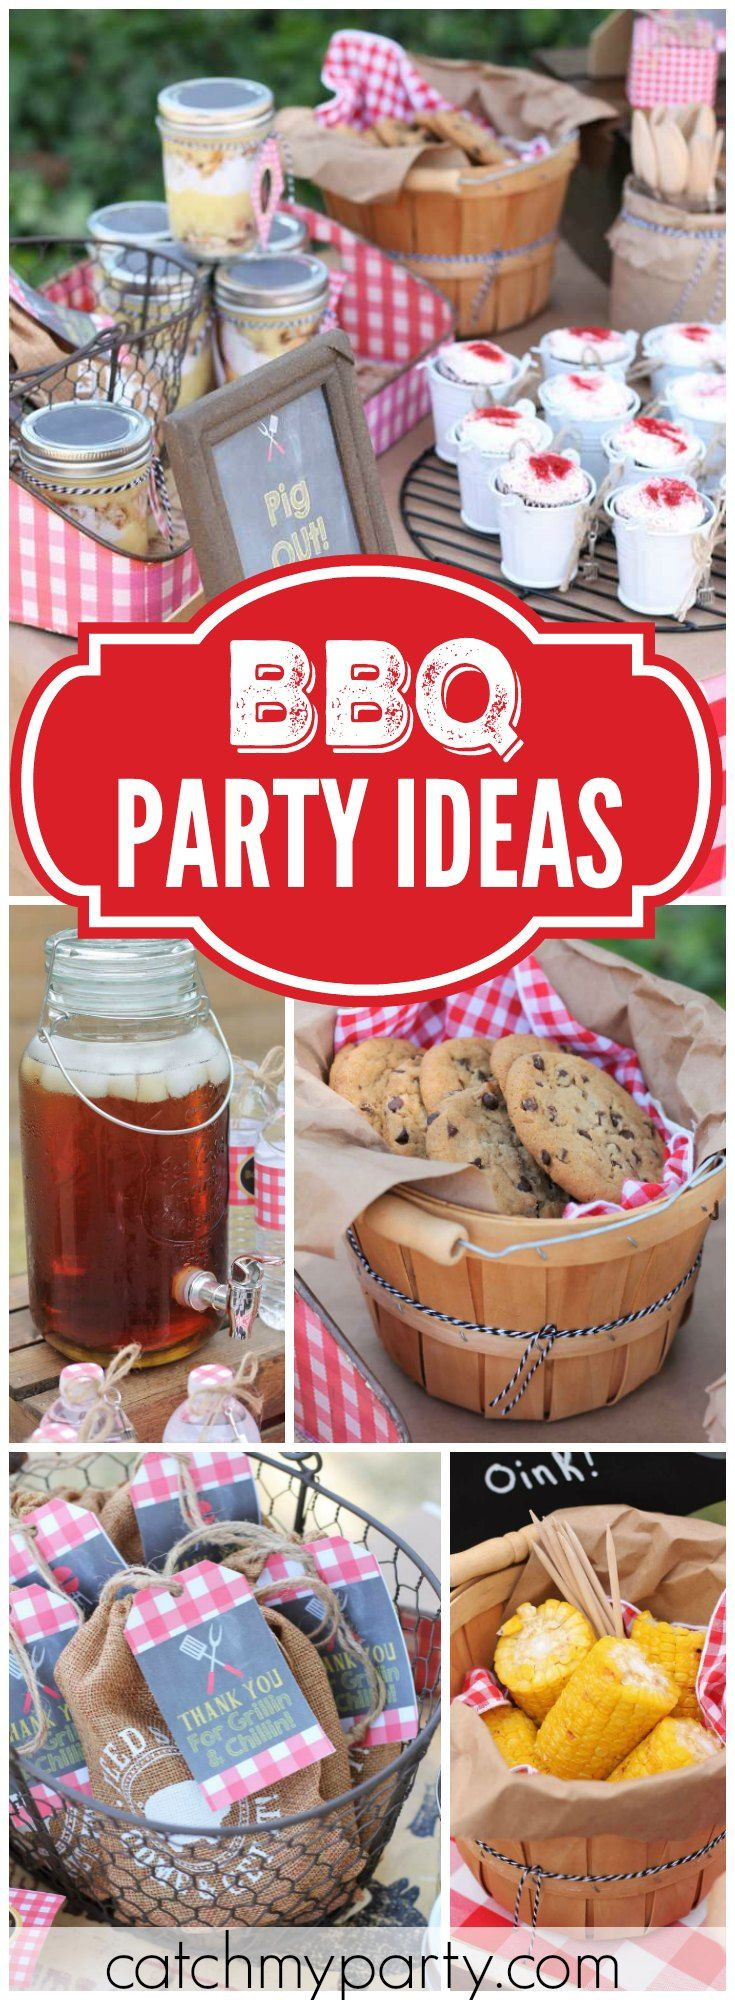 Summer Bbq Party Food Ideas
 How great is this patriotic backyard summer BBQ party See